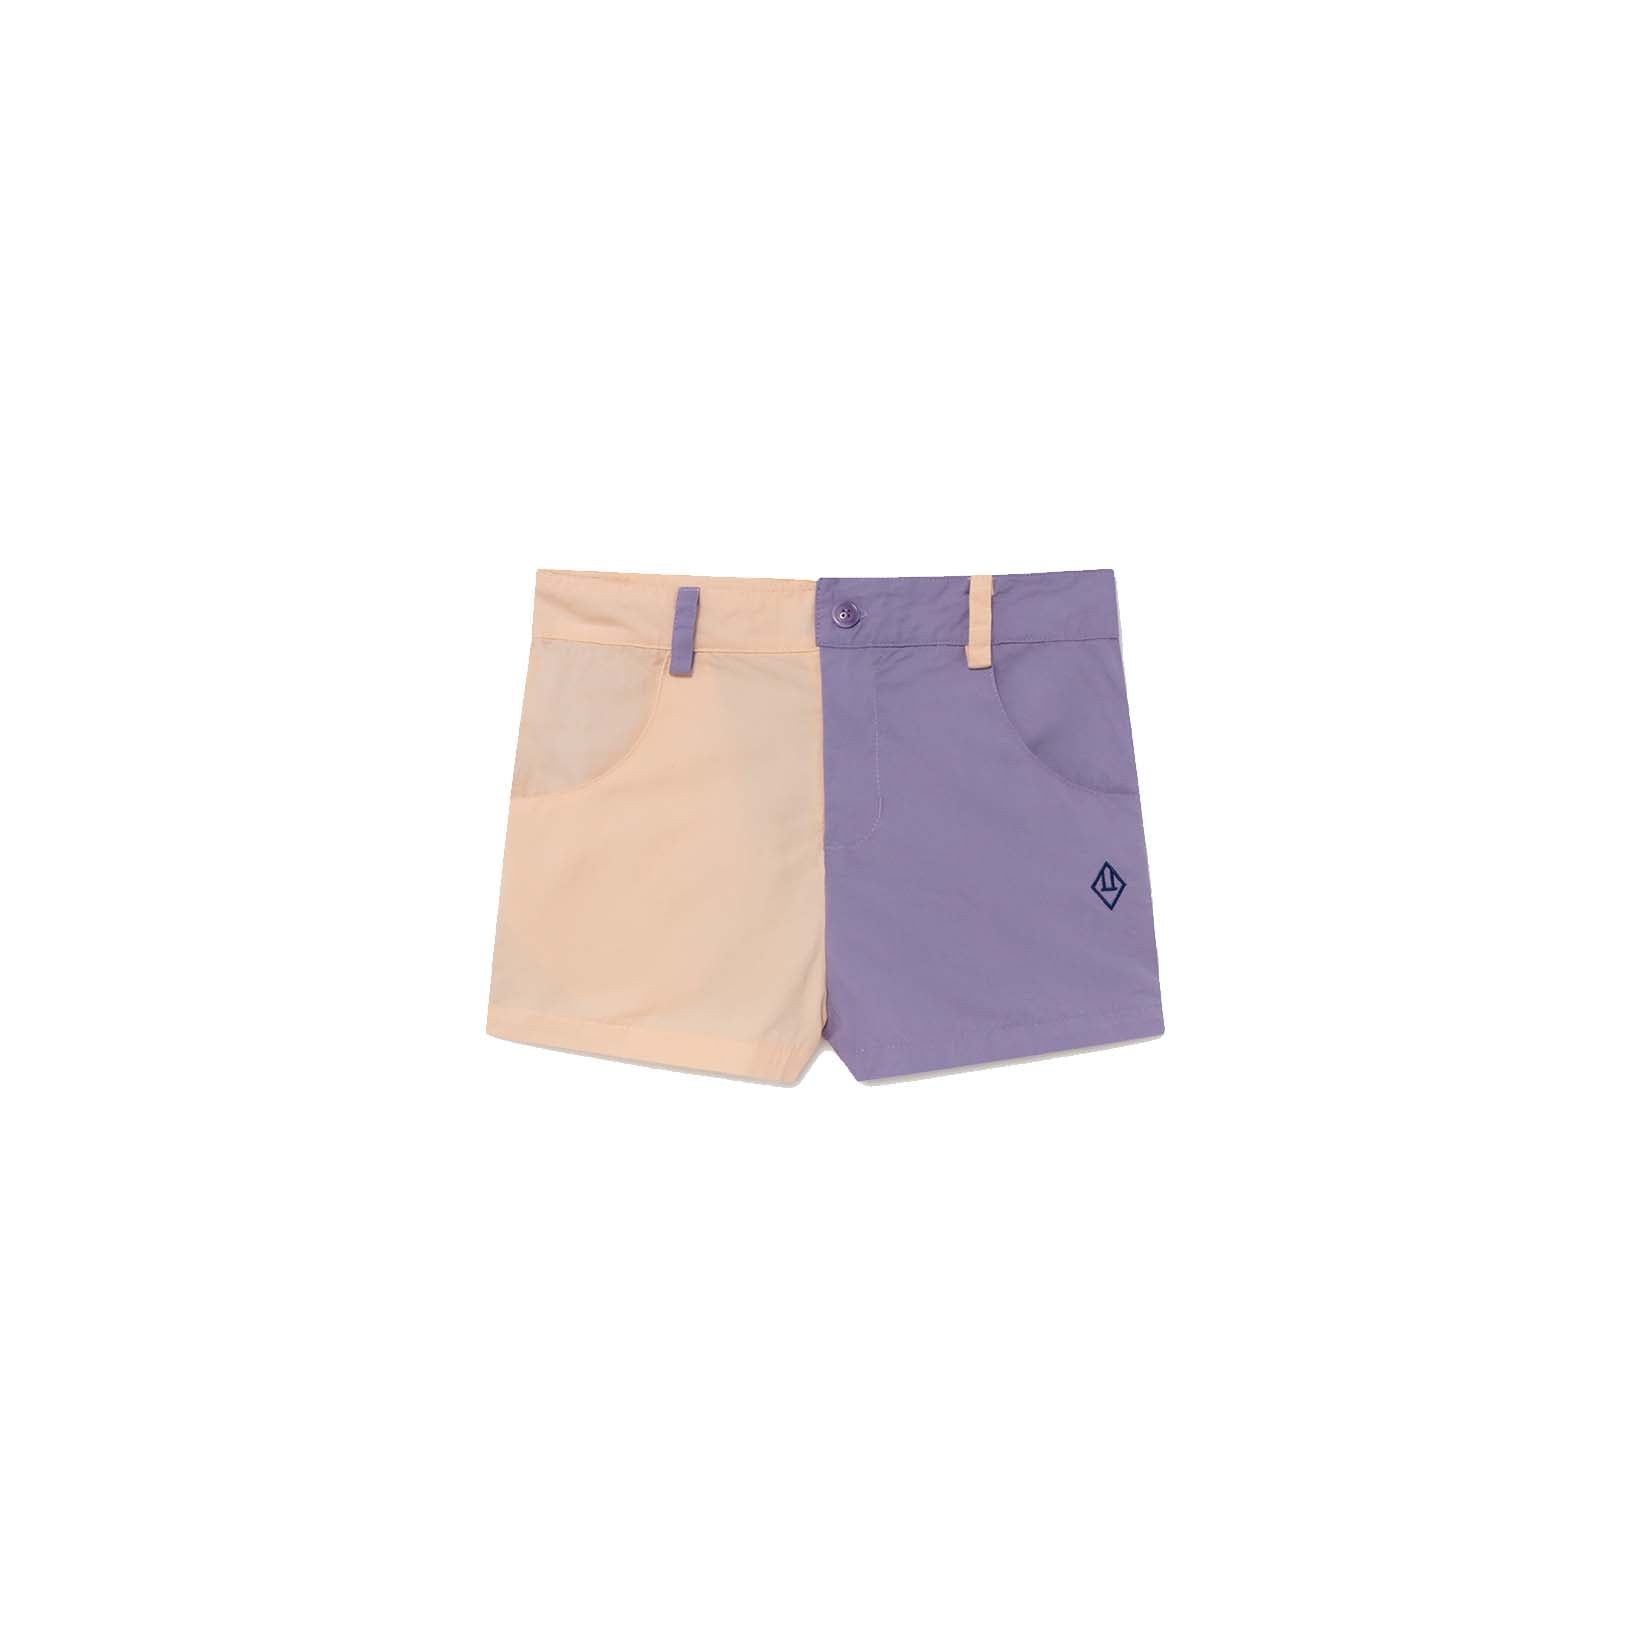 Boys & Girls Two-color Cotton Shorts